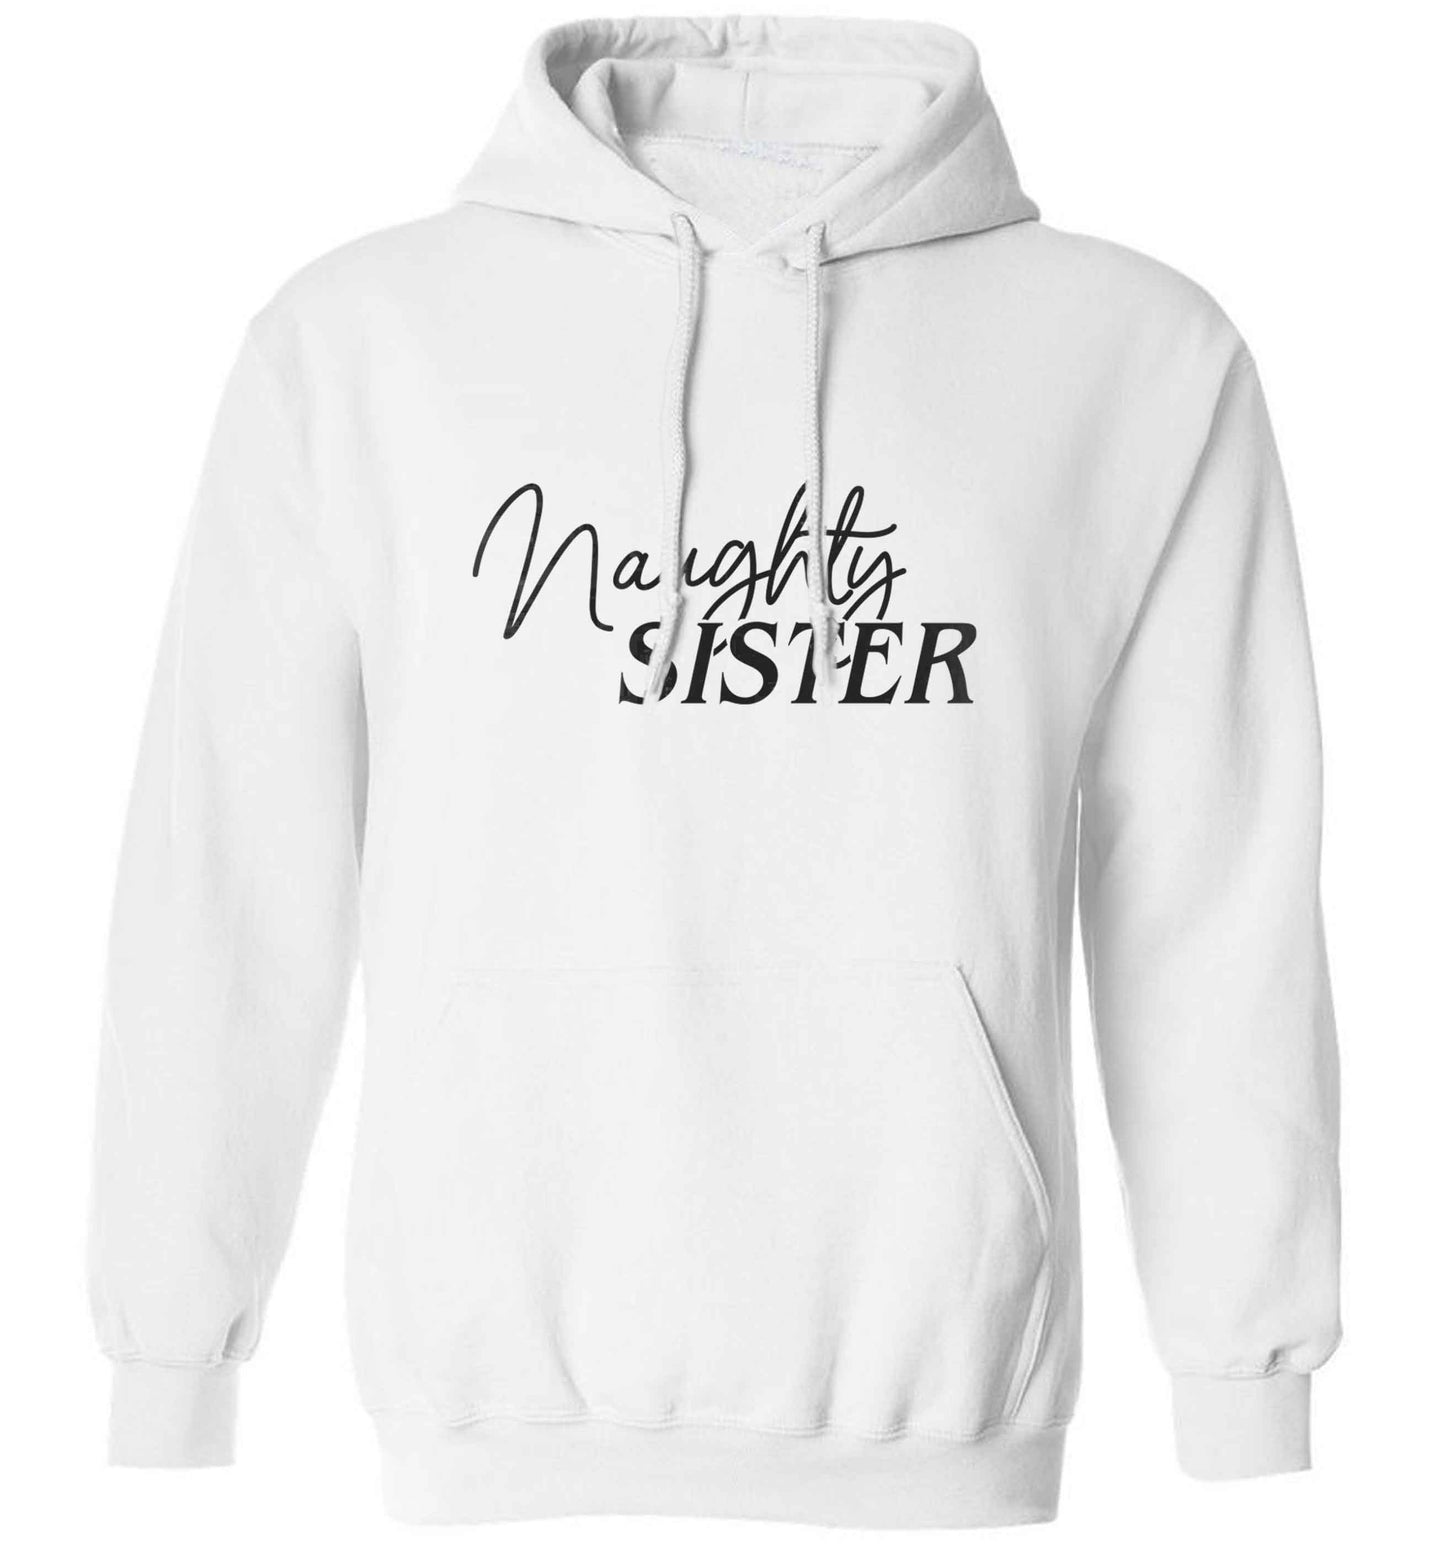 Naughty Sister adults unisex white hoodie 2XL